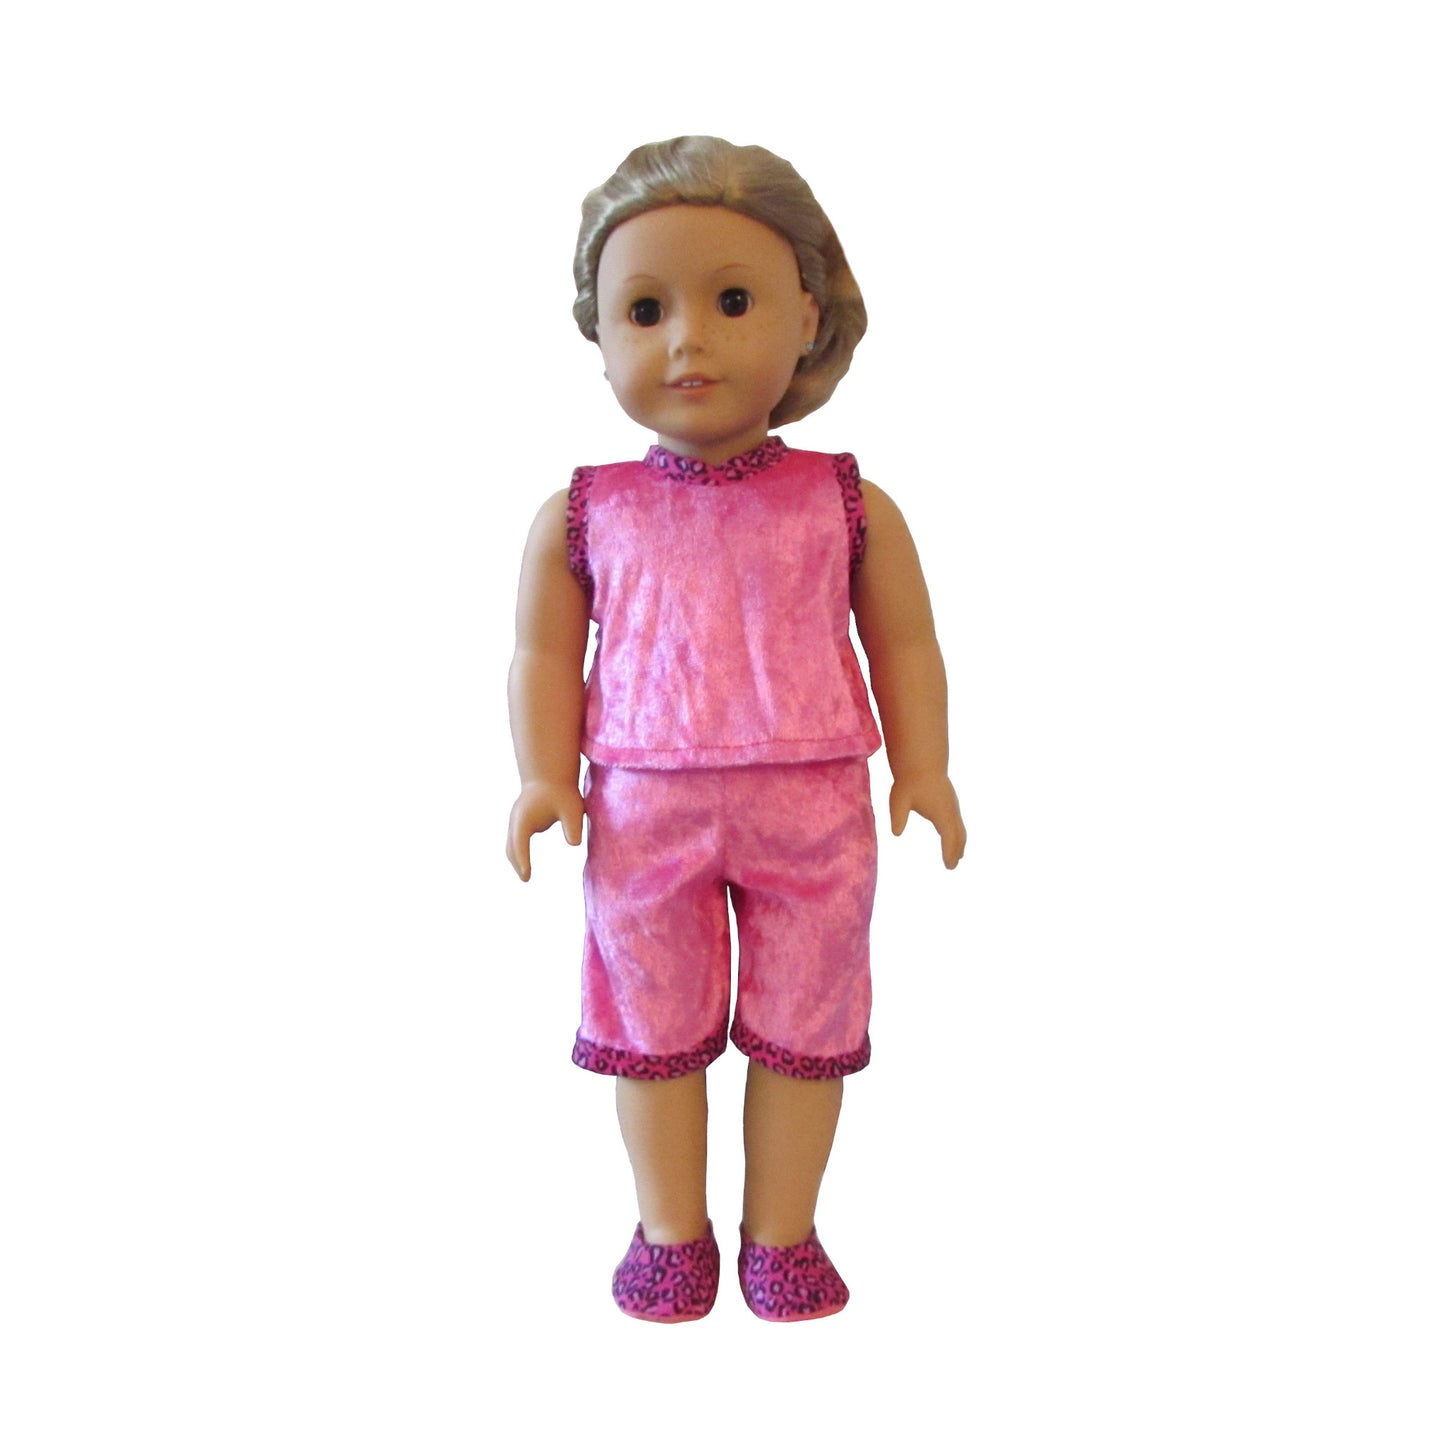 Pink Cheetah Trimmed Panne Velvet Doll Pajama Top, Shorts, and Slippers for 18-inch dolls